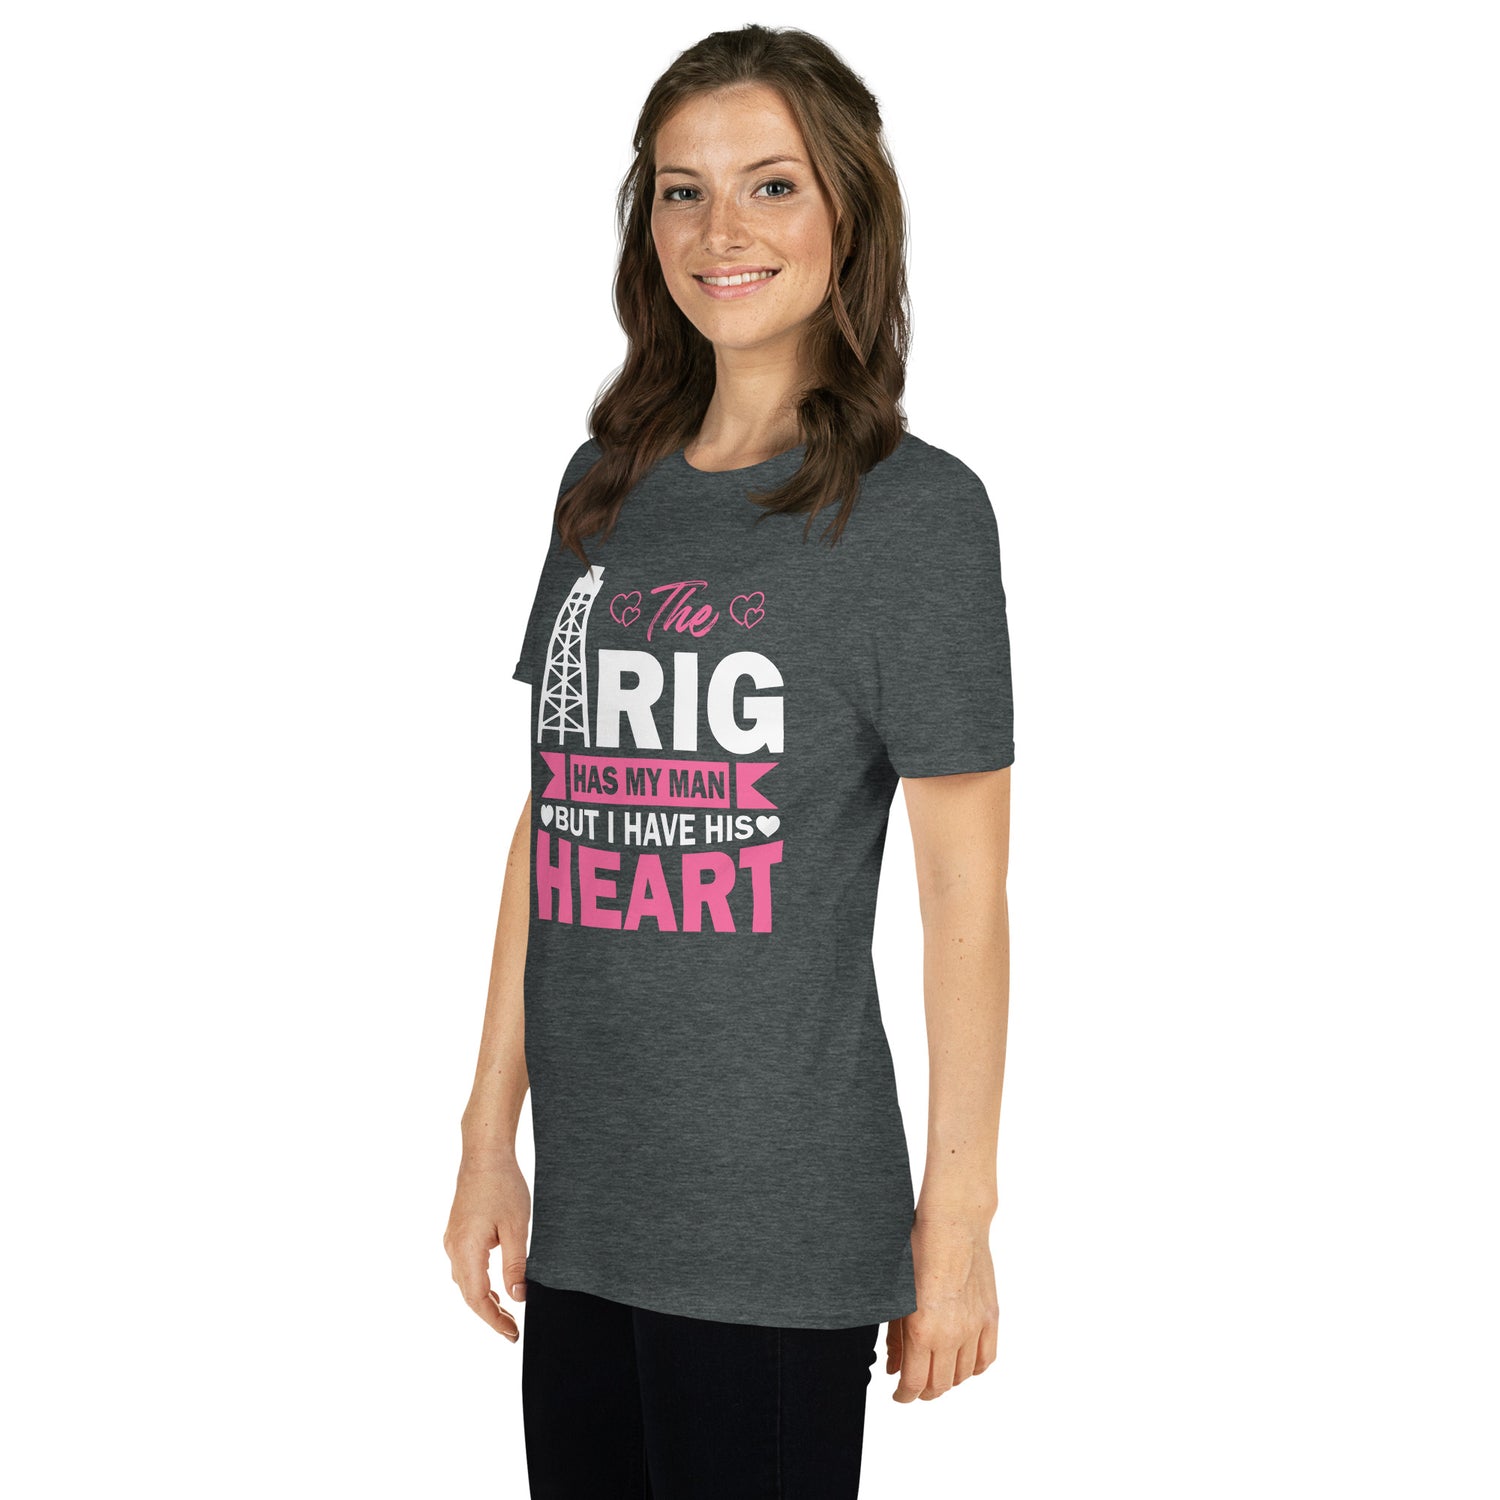 The Rig Has My Man, But I Have His Heart - Women T-Shirt